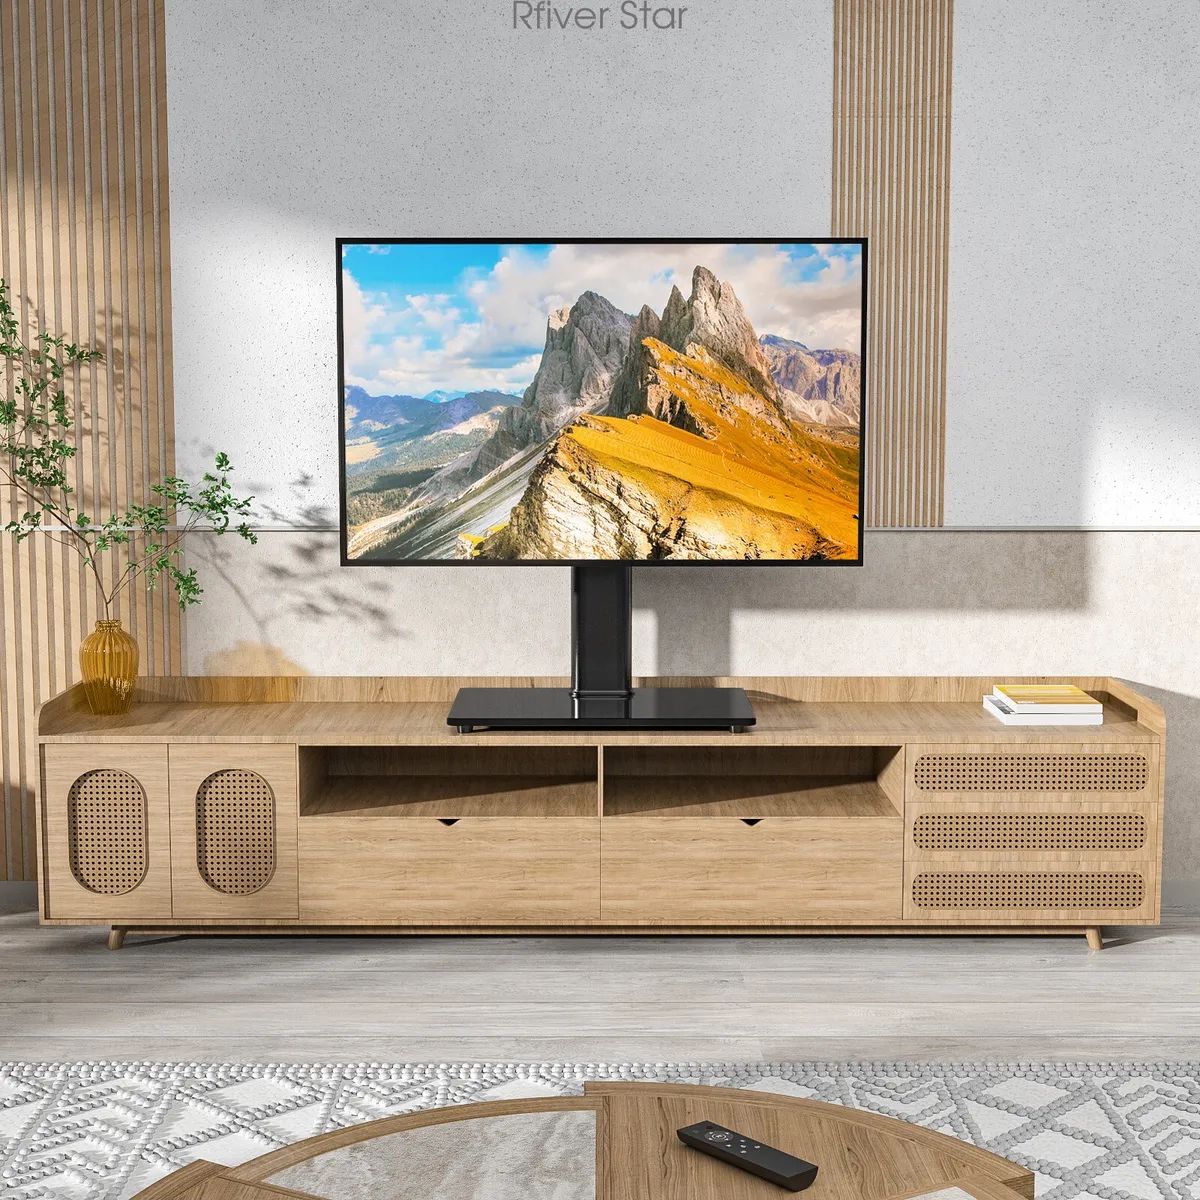 Universal Swivel Tabletop Tv Stand For Flat Screens 23 24 26 32 39 40 43  Inch Tv | Ebay Regarding Universal Tabletop Tv Stands (Photo 4 of 15)